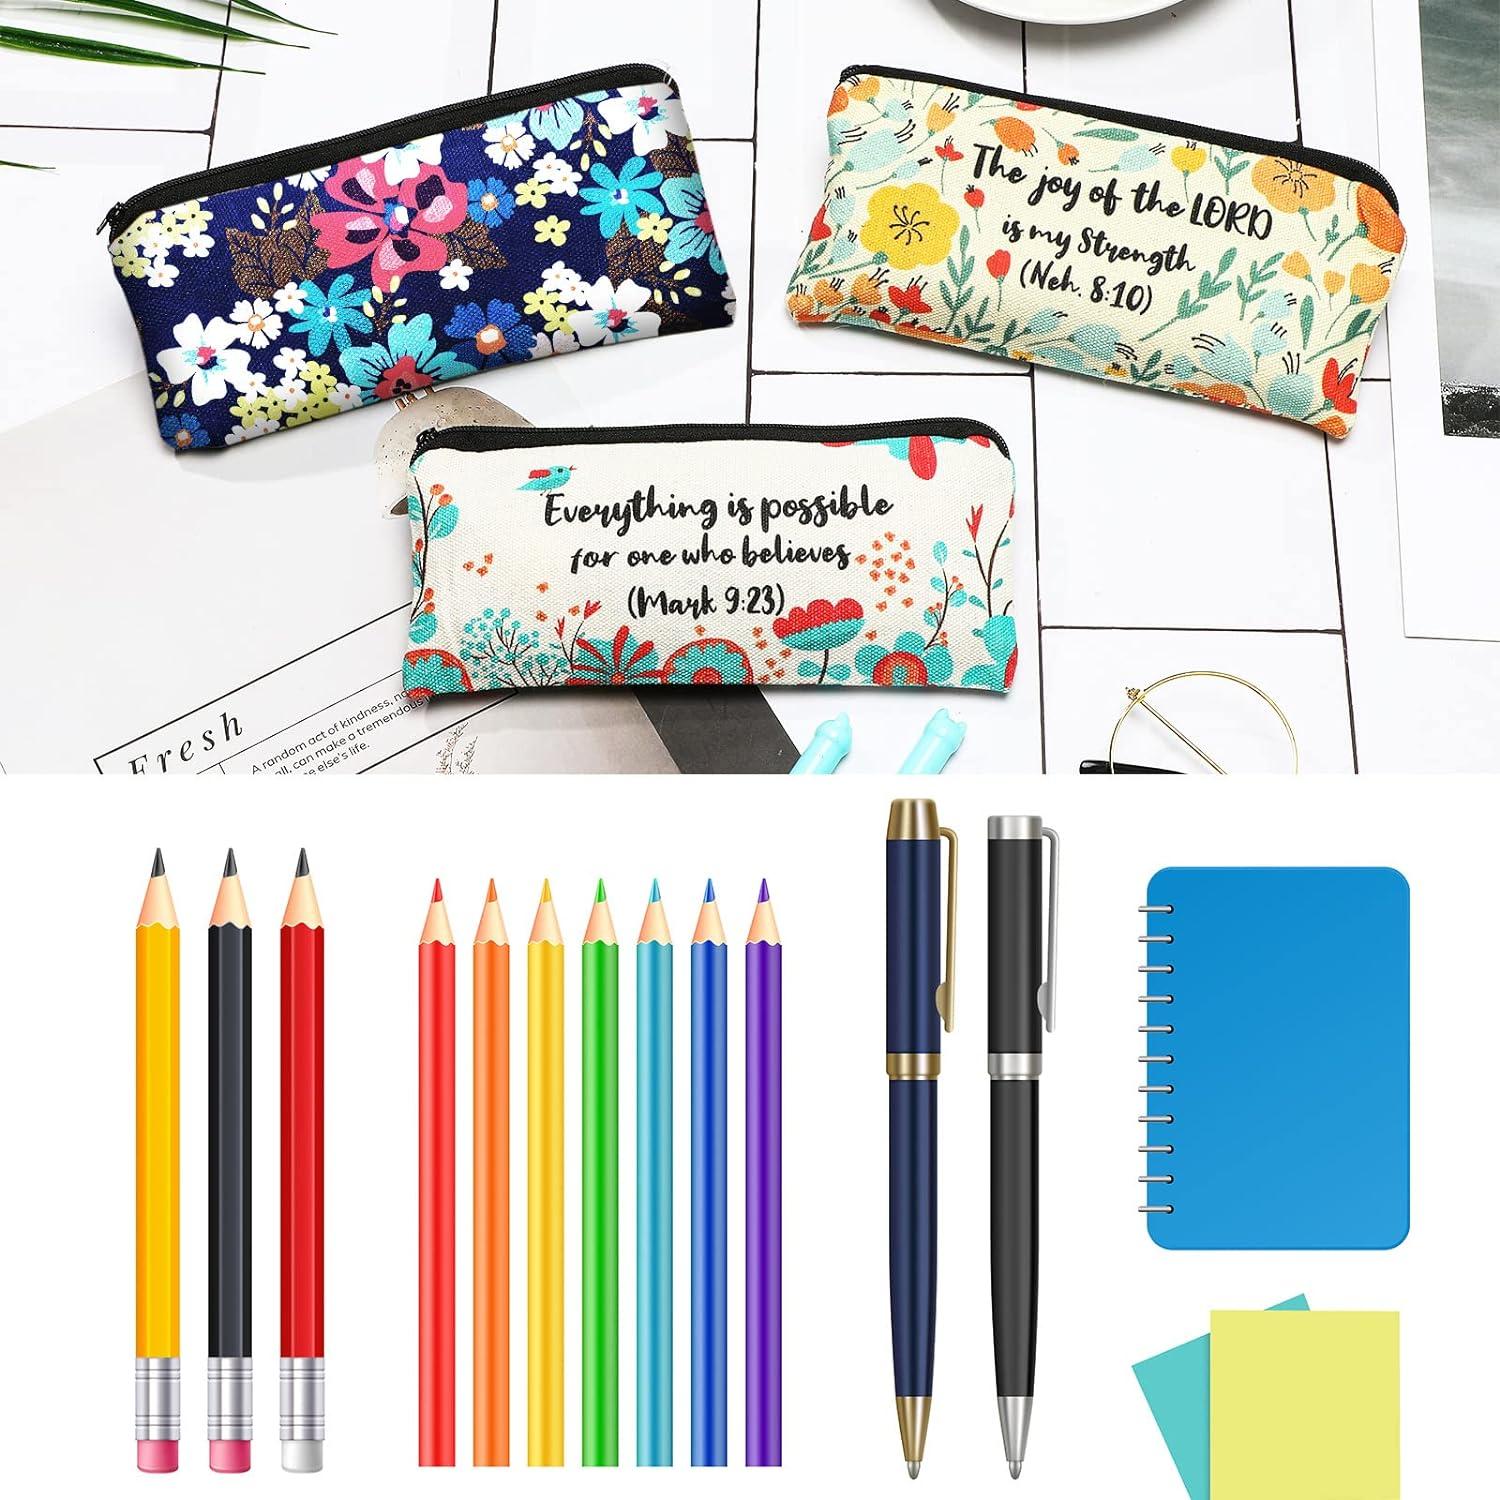  Talltalk 8 Pcs Christian Cosmetic Bags Inspirational Bible  Verse Pencil Pouch Motivational Gifts with Prayers Double Sided Makeup Bags  with Zipper Religious Christmas Gifts for Friends(Elegant) : Office Products